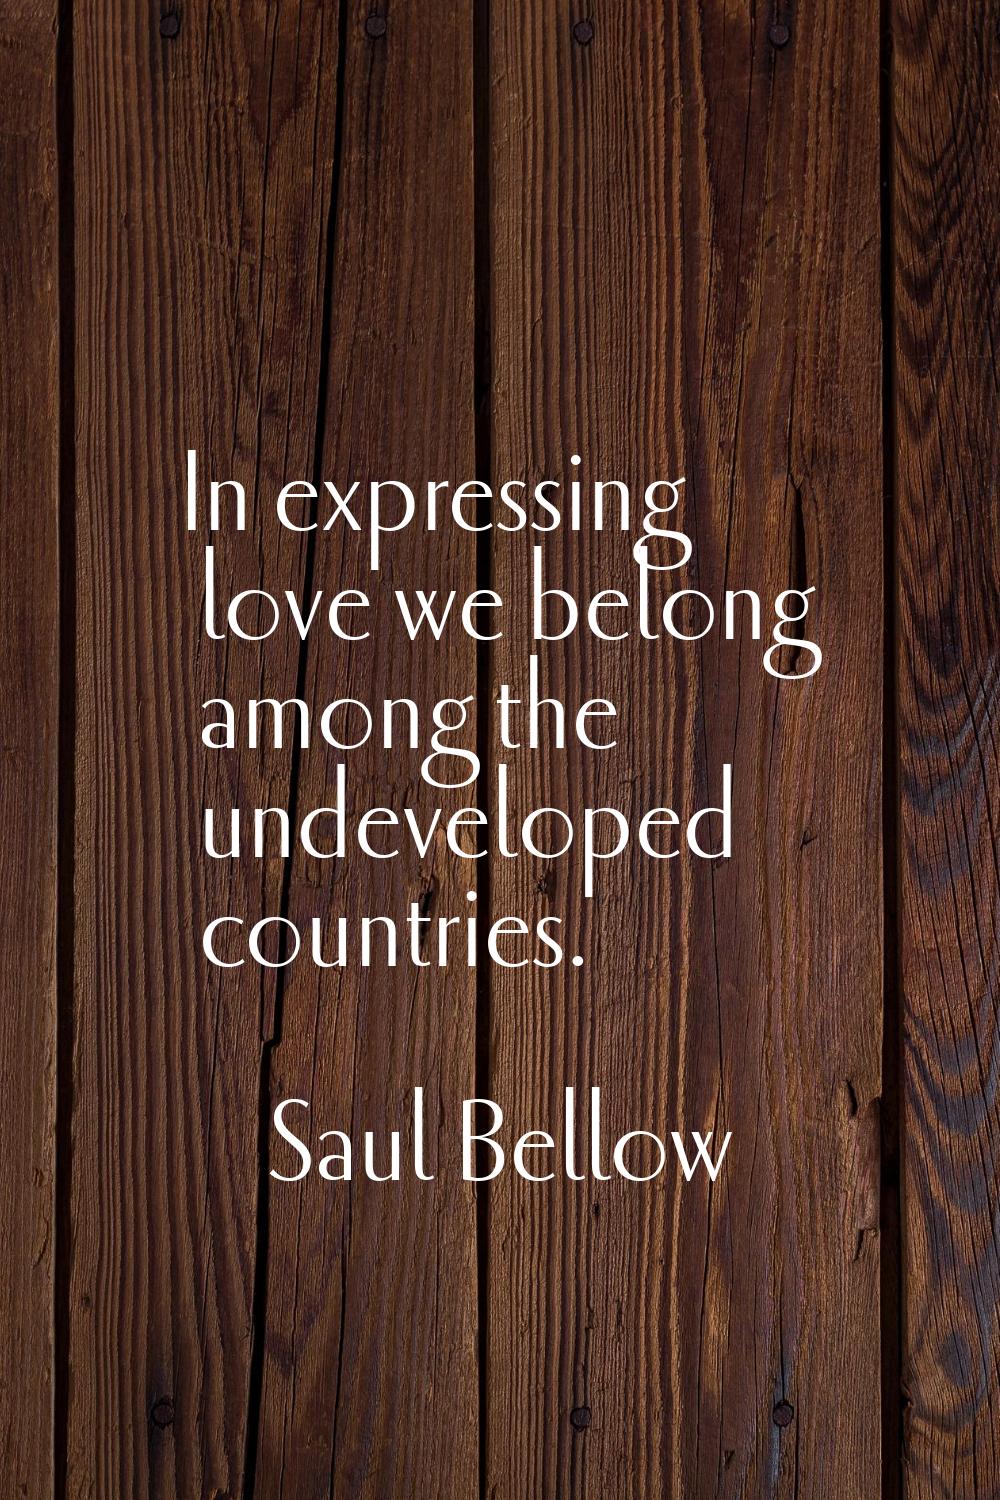 In expressing love we belong among the undeveloped countries.